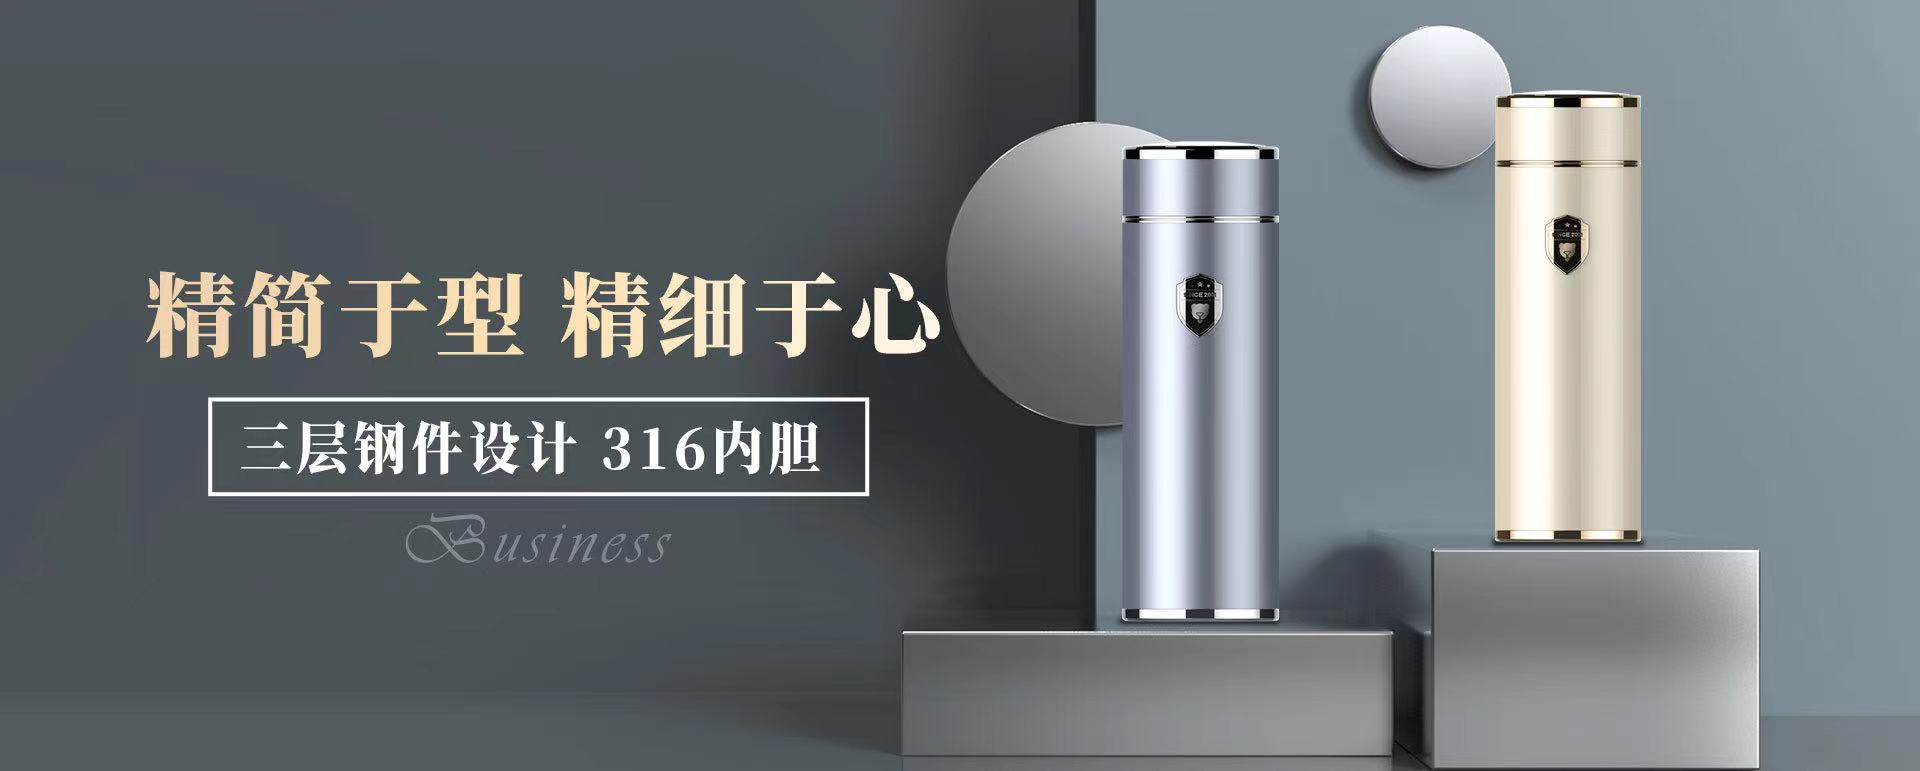 Zhejiang kuangdi,kuangdi industry and trade - zhejiang kuangdi industry and trade - focus on the thermos cup, thermos kettle, glass research and manufacture of large-scale enterprises